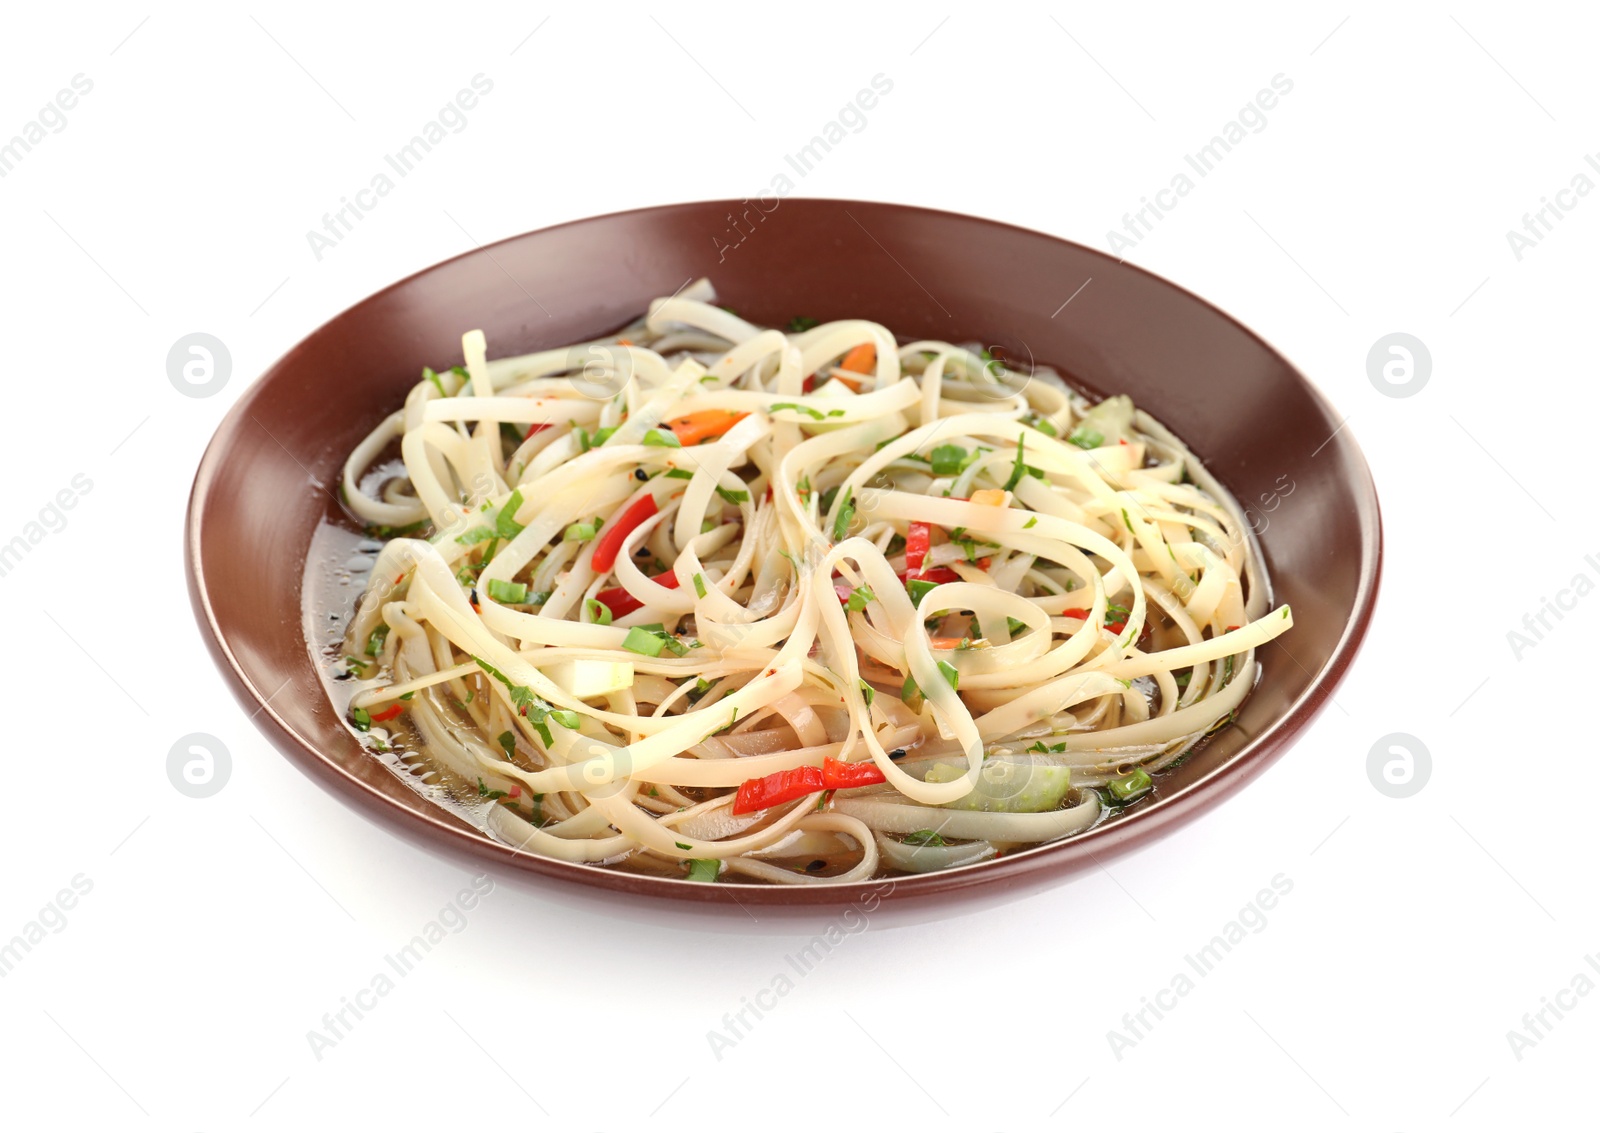 Photo of Plate of delicious noodles with broth and vegetables isolated on white